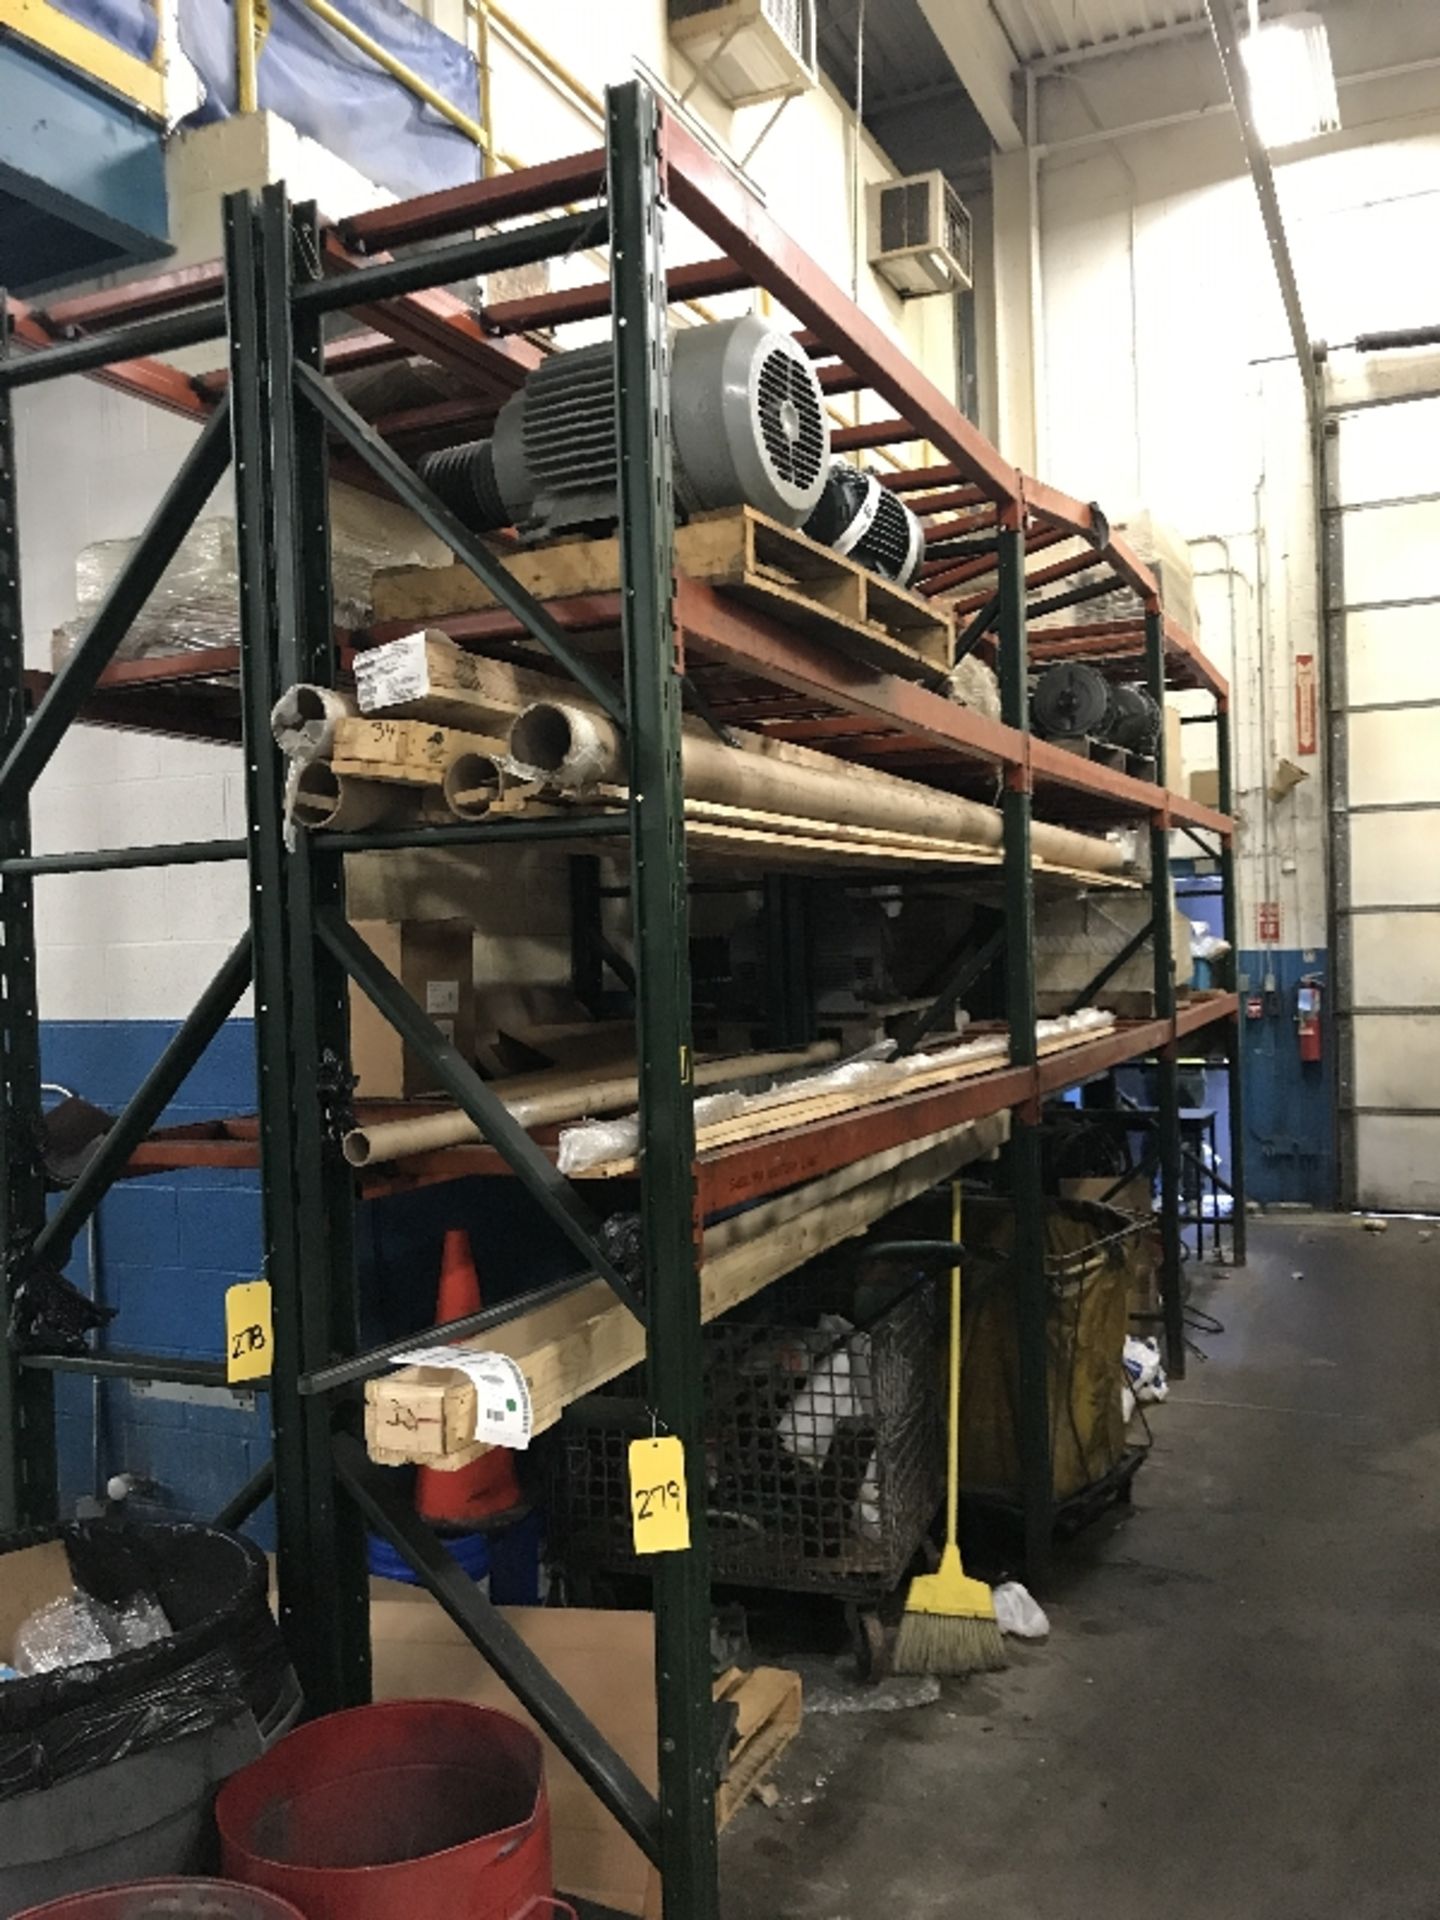 3 section of Pallet Racking, No Contents